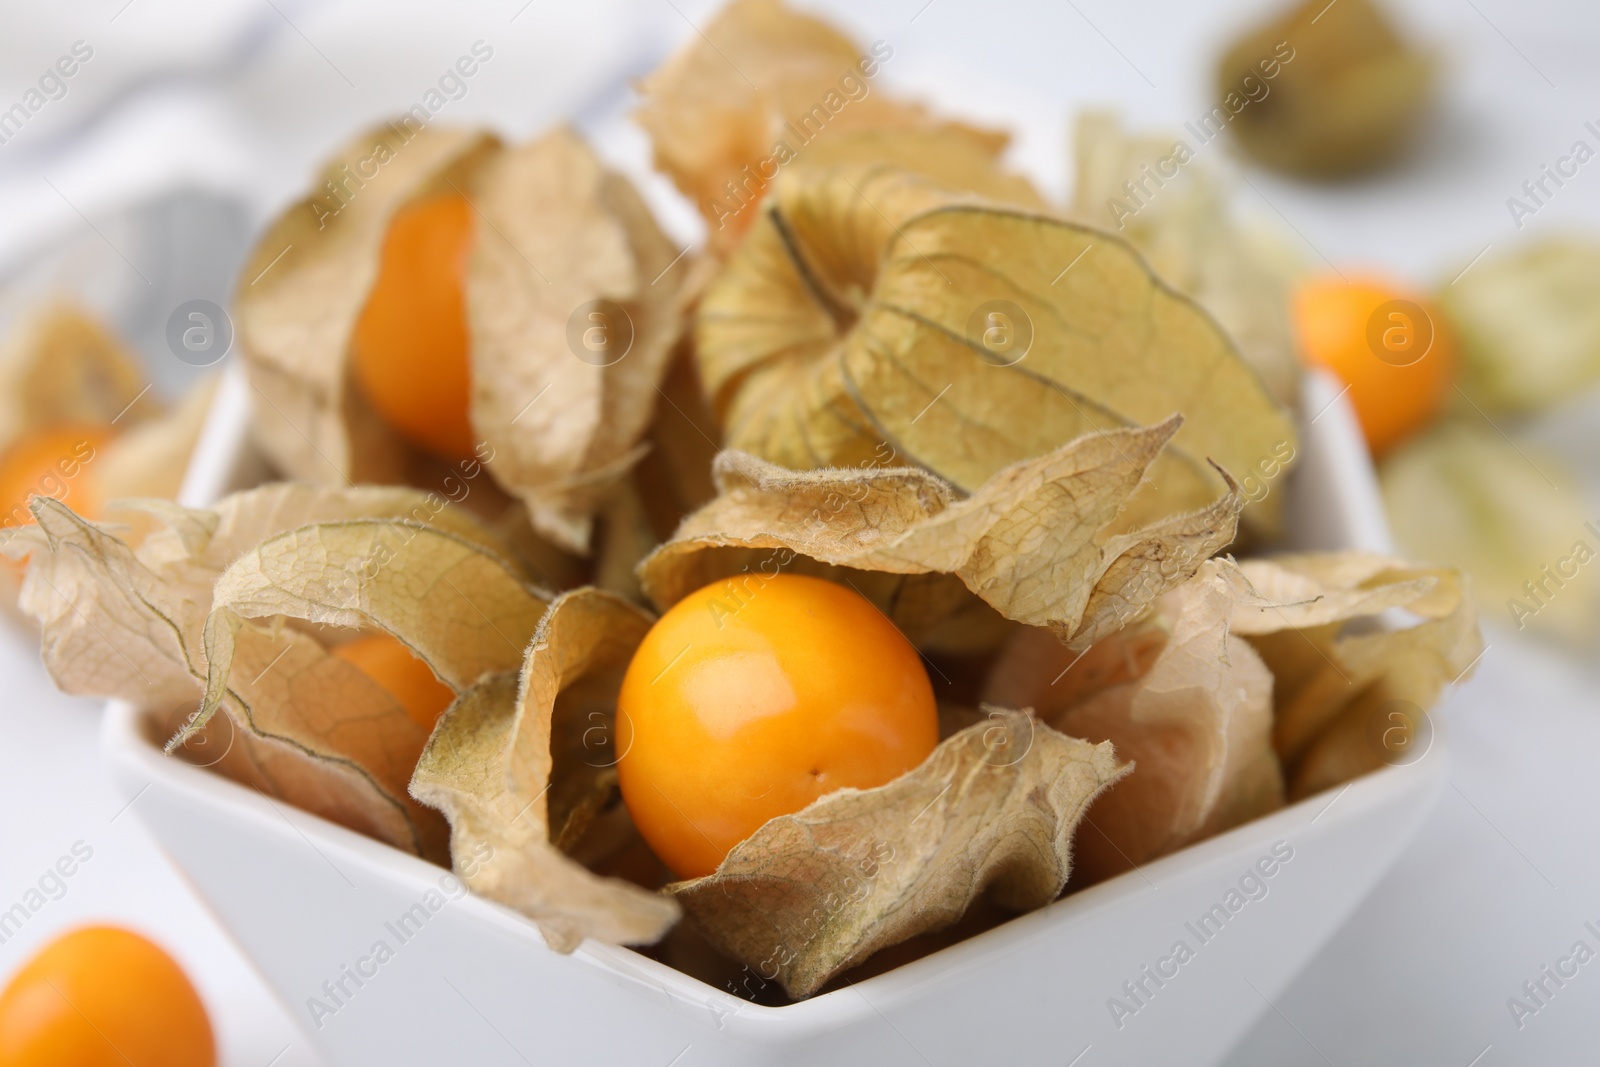 Photo of Ripe physalis fruits with calyxes in bowl on white marble table, closeup